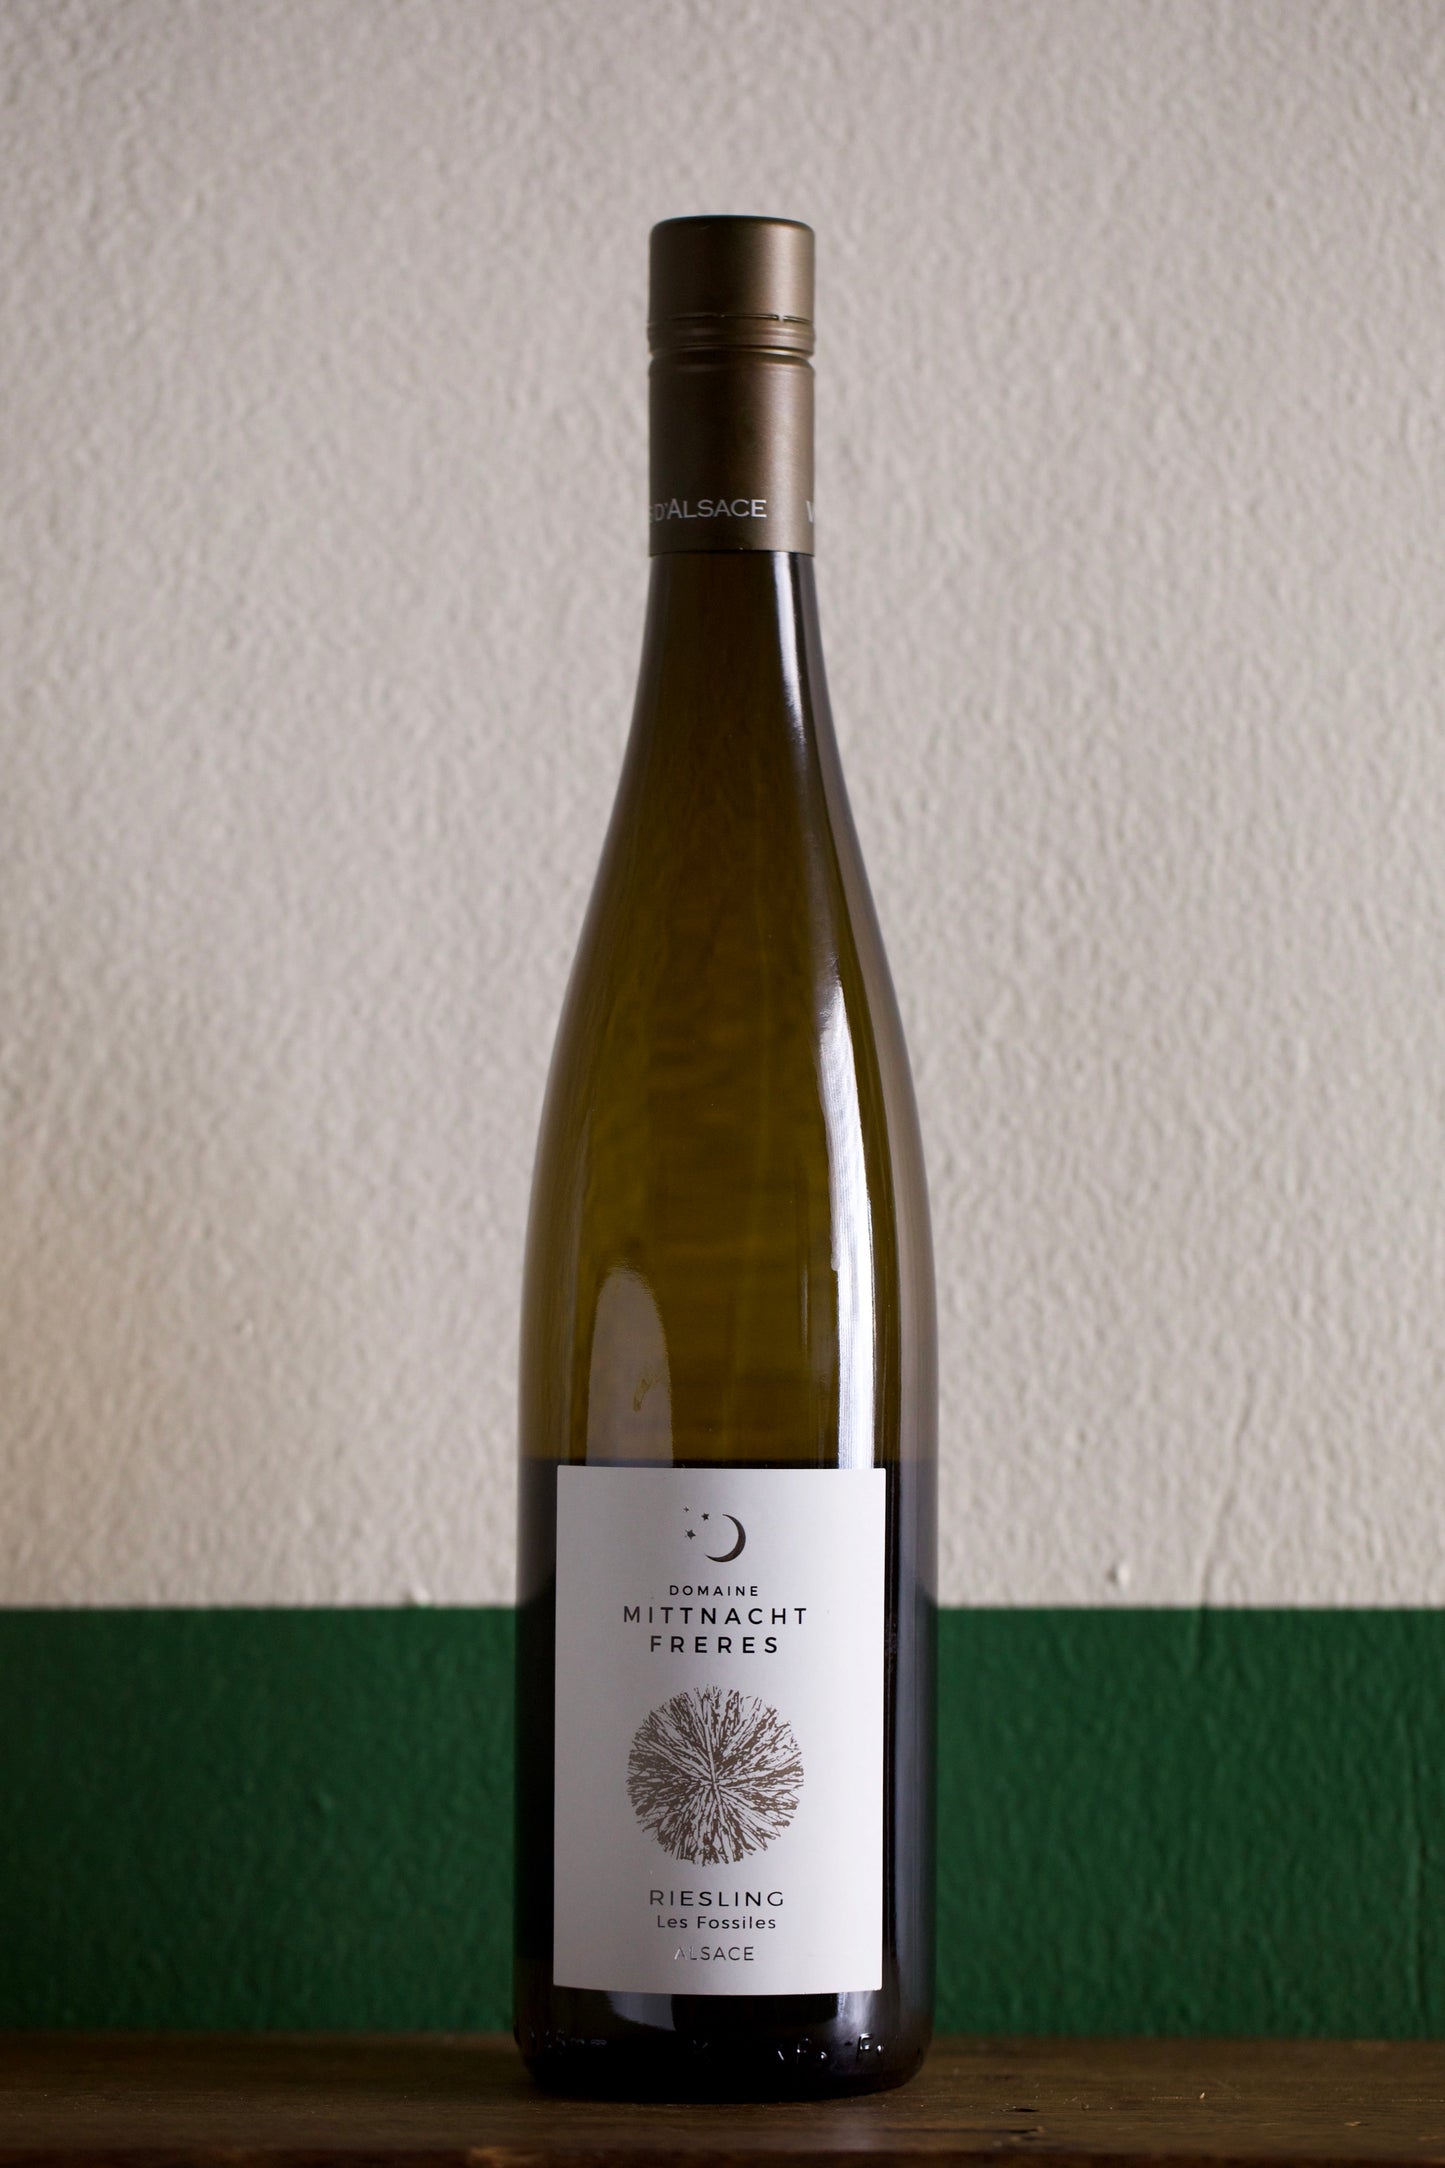 Bottle of Mittnacht Freres 'Les Fossile' Riesling 2019 750ml